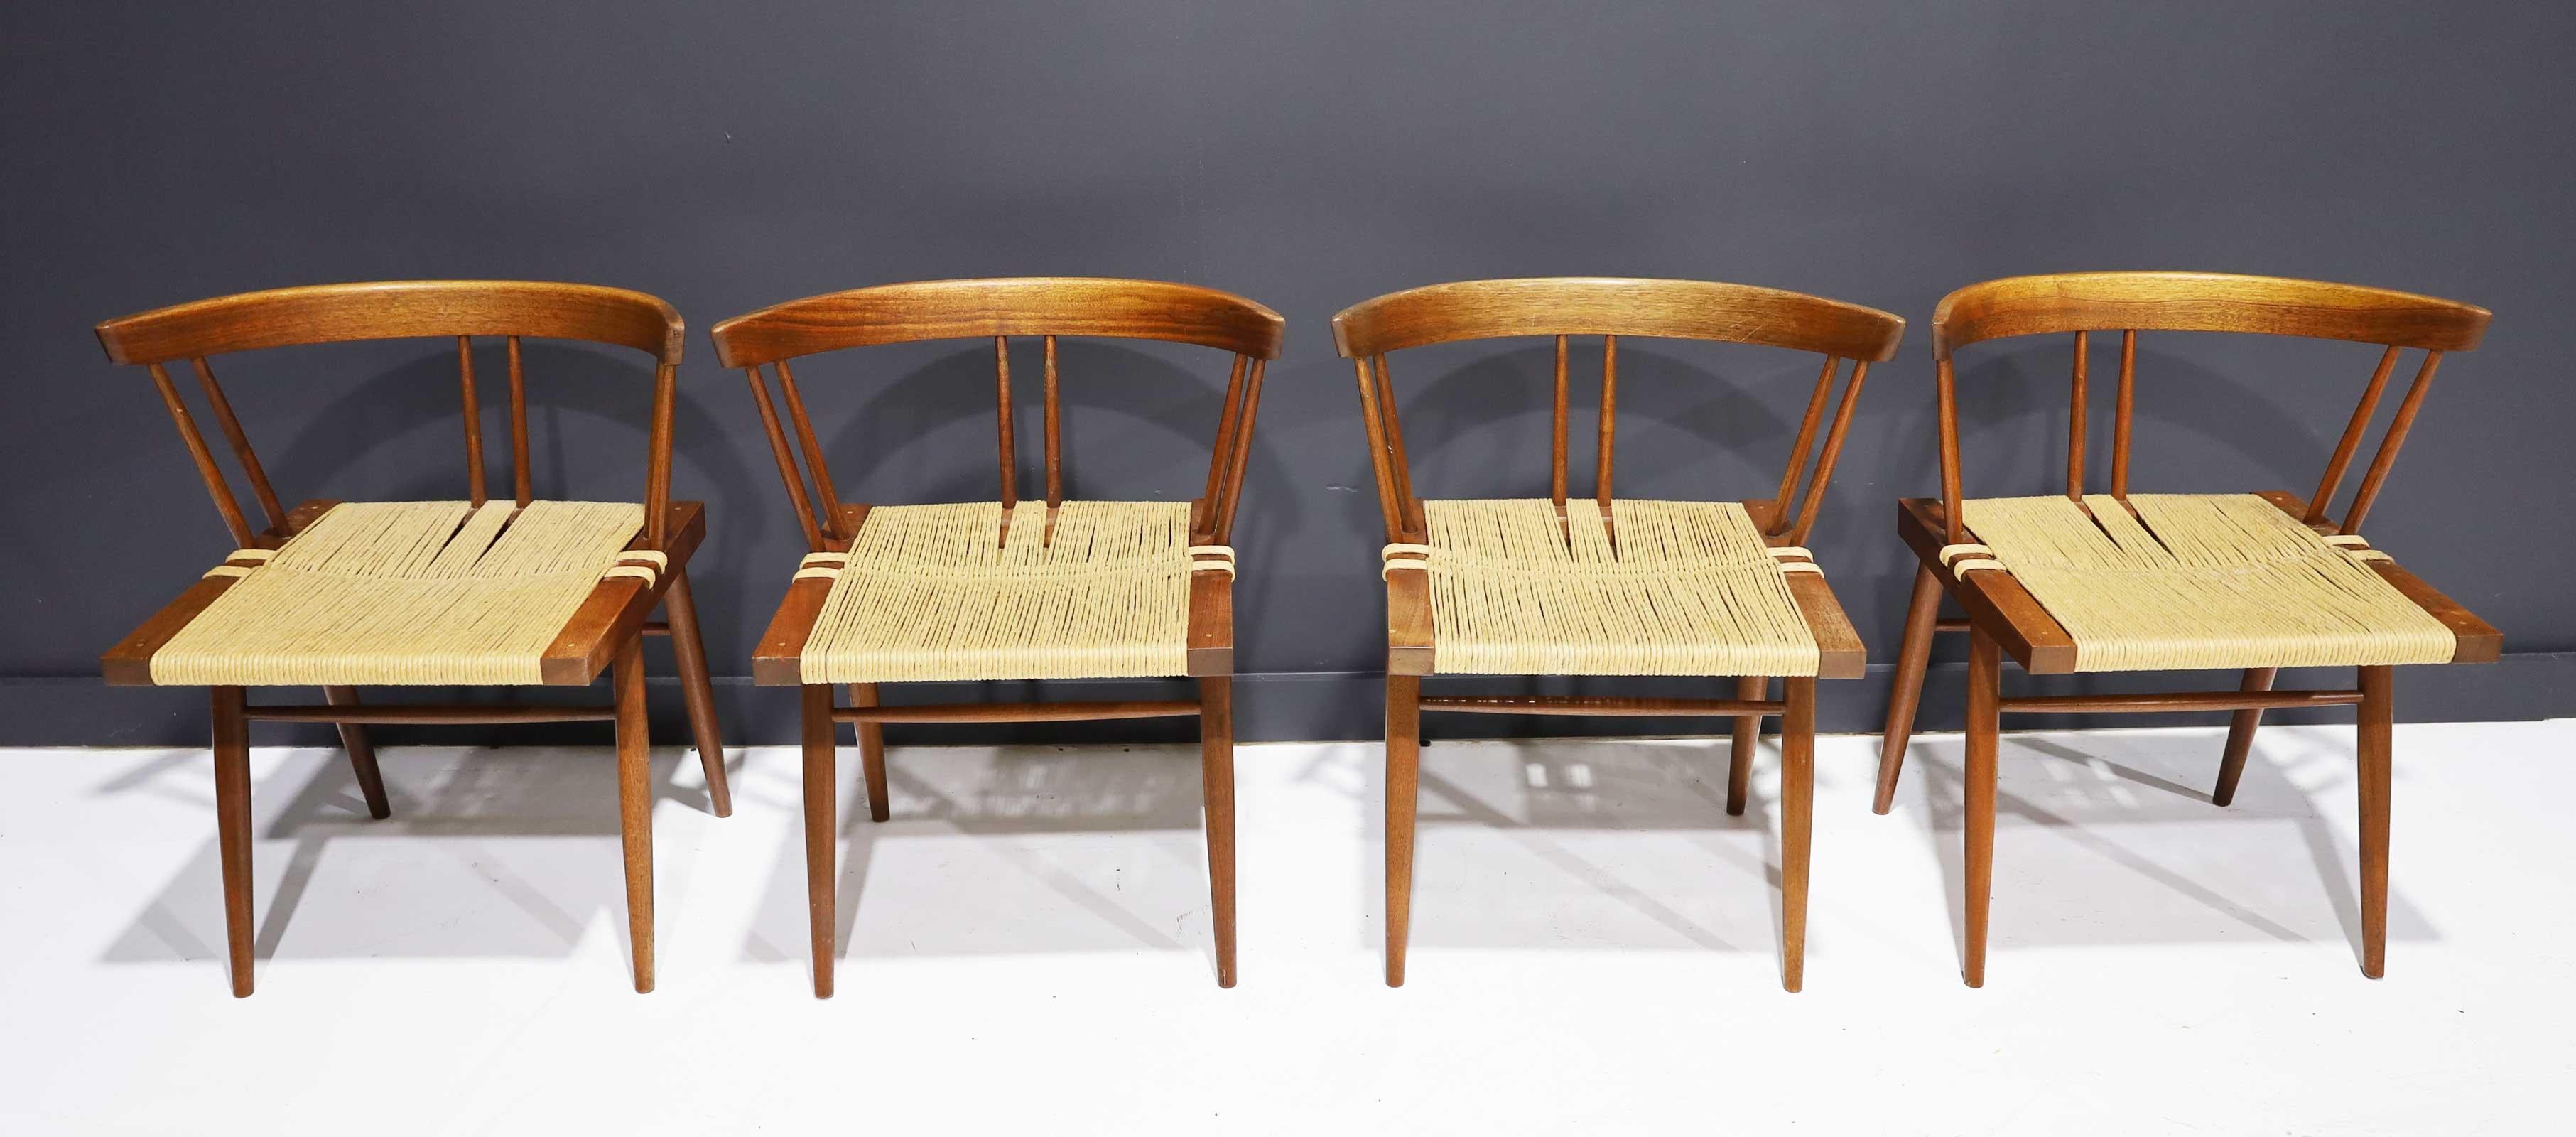 Set of 4 walnut grass-seat chairs, designed by George Nakashima and manufactured by George Nakashima. Includes original paperwork.